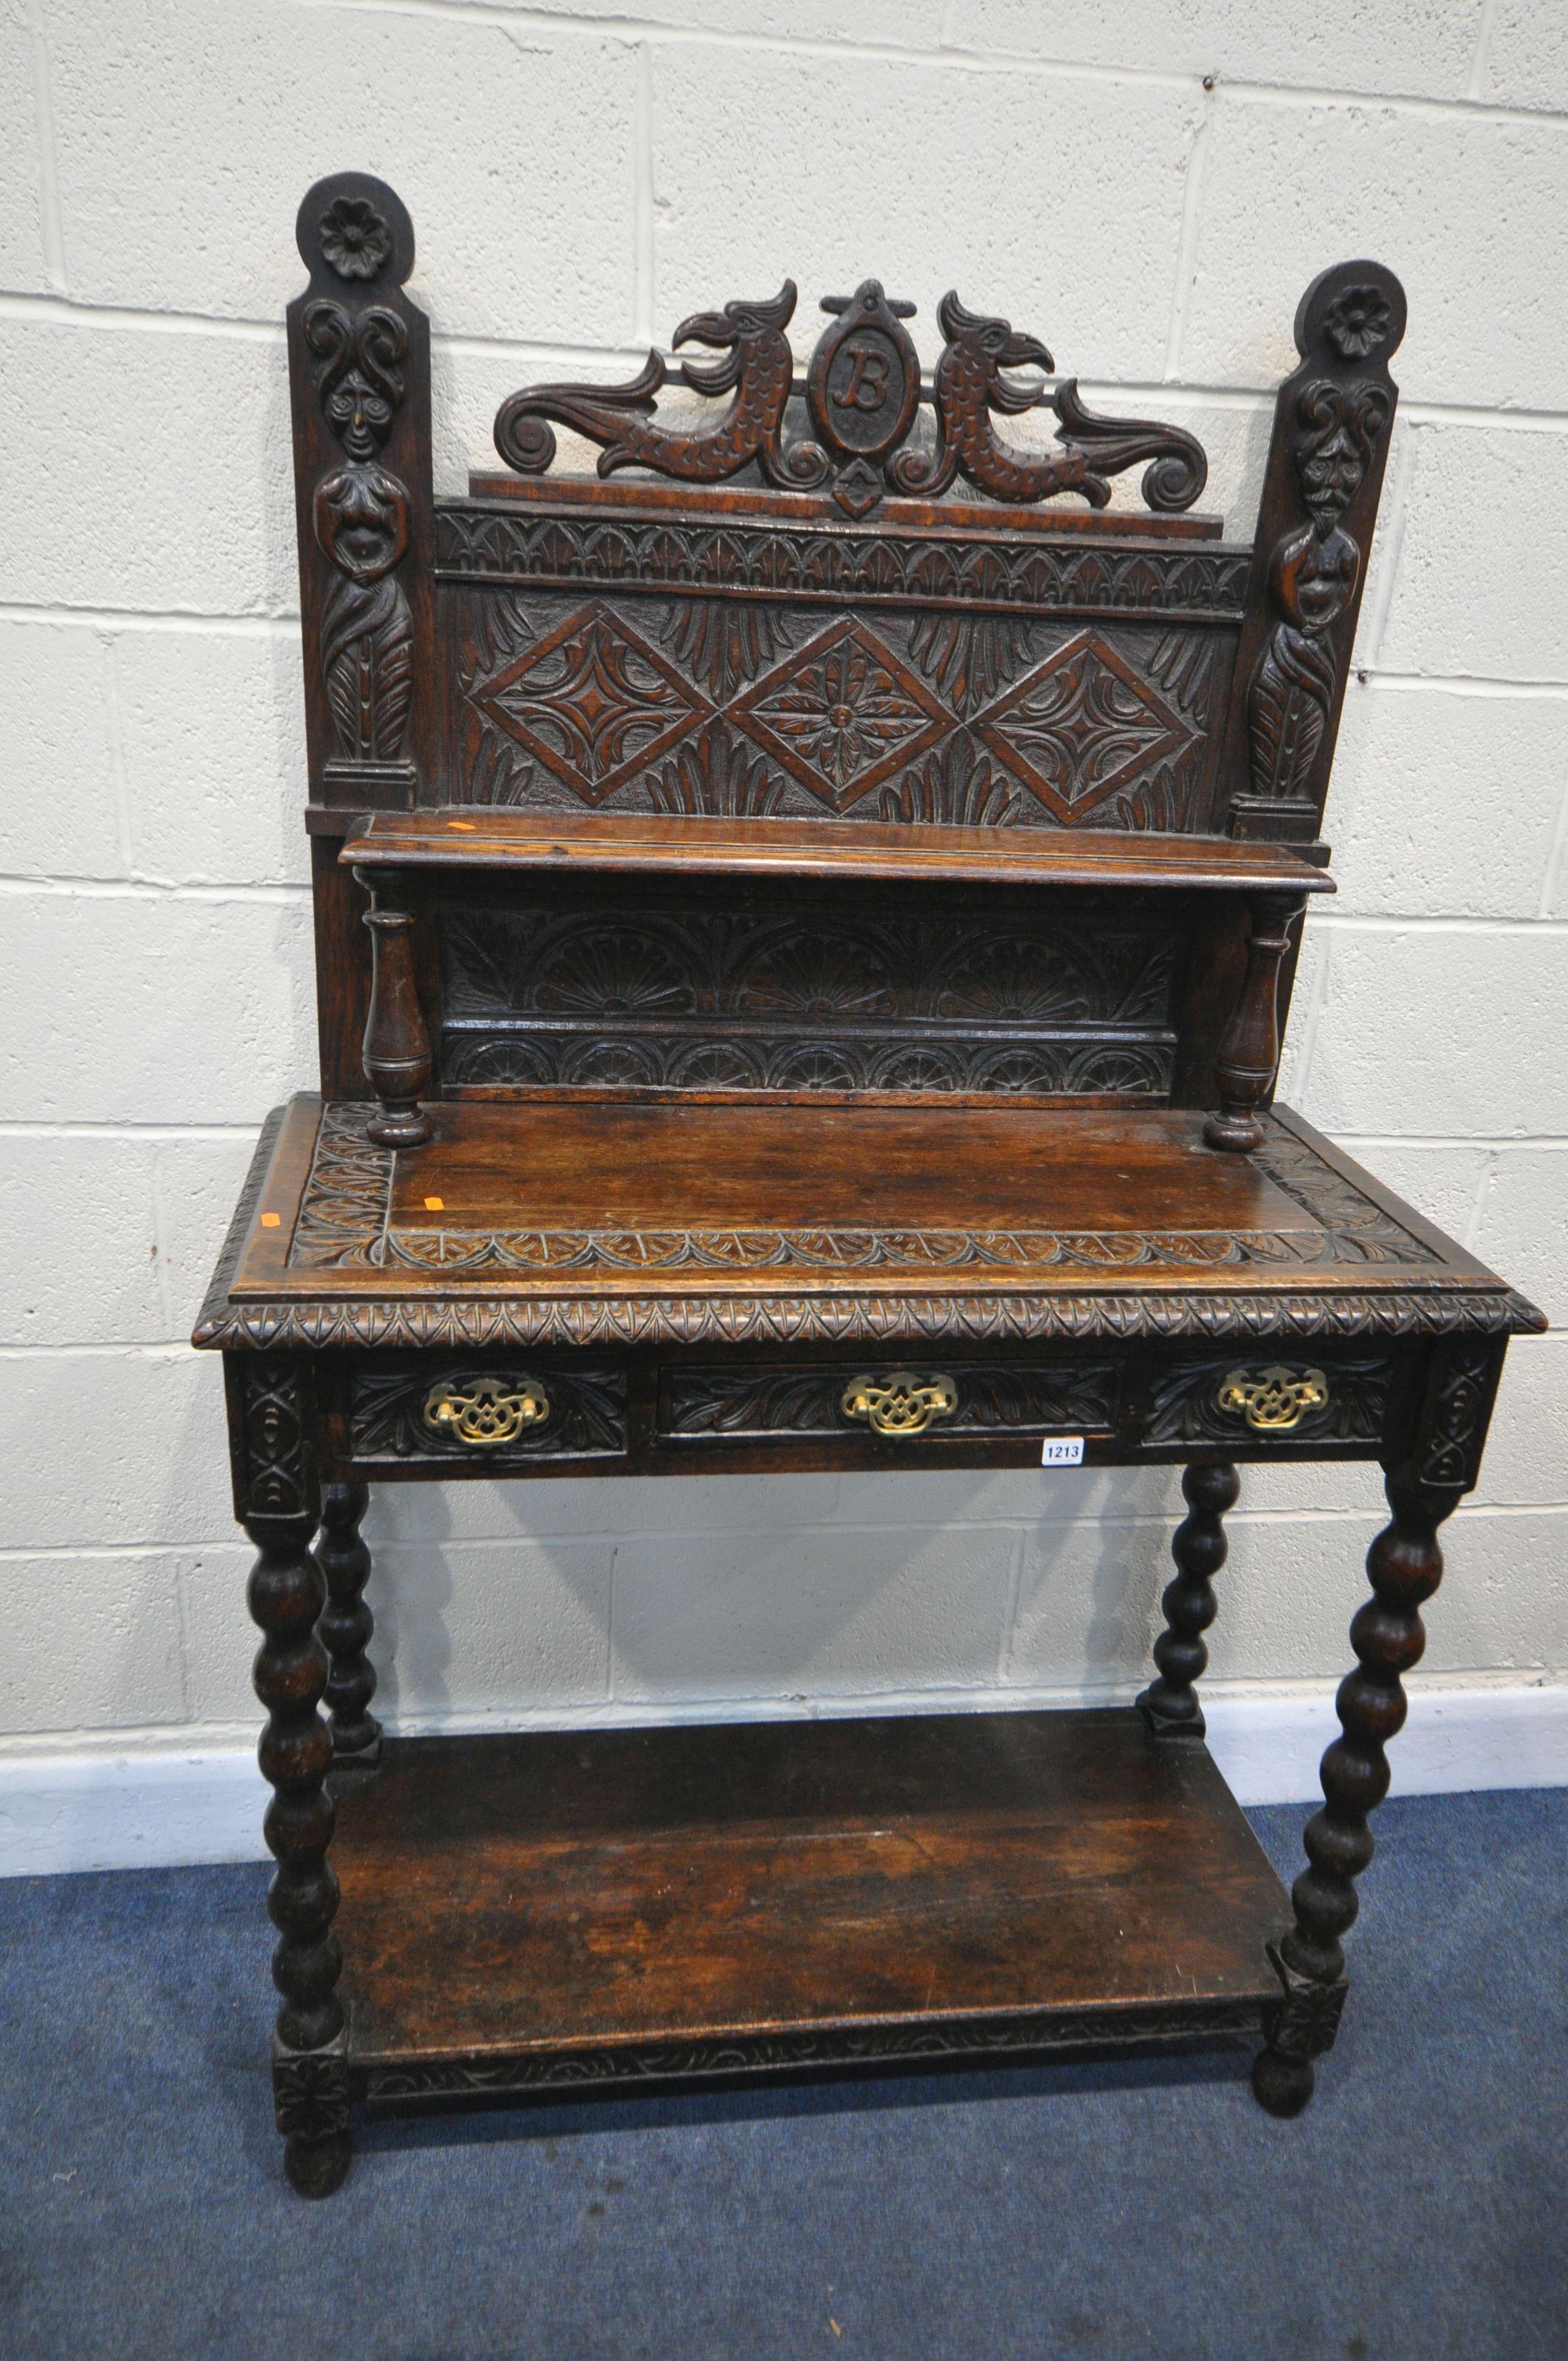 A LATE 19TH/EARLY 20TH CENTURY CARVED OAK SIDE TABLE, the raised back with a single shelf, depicting